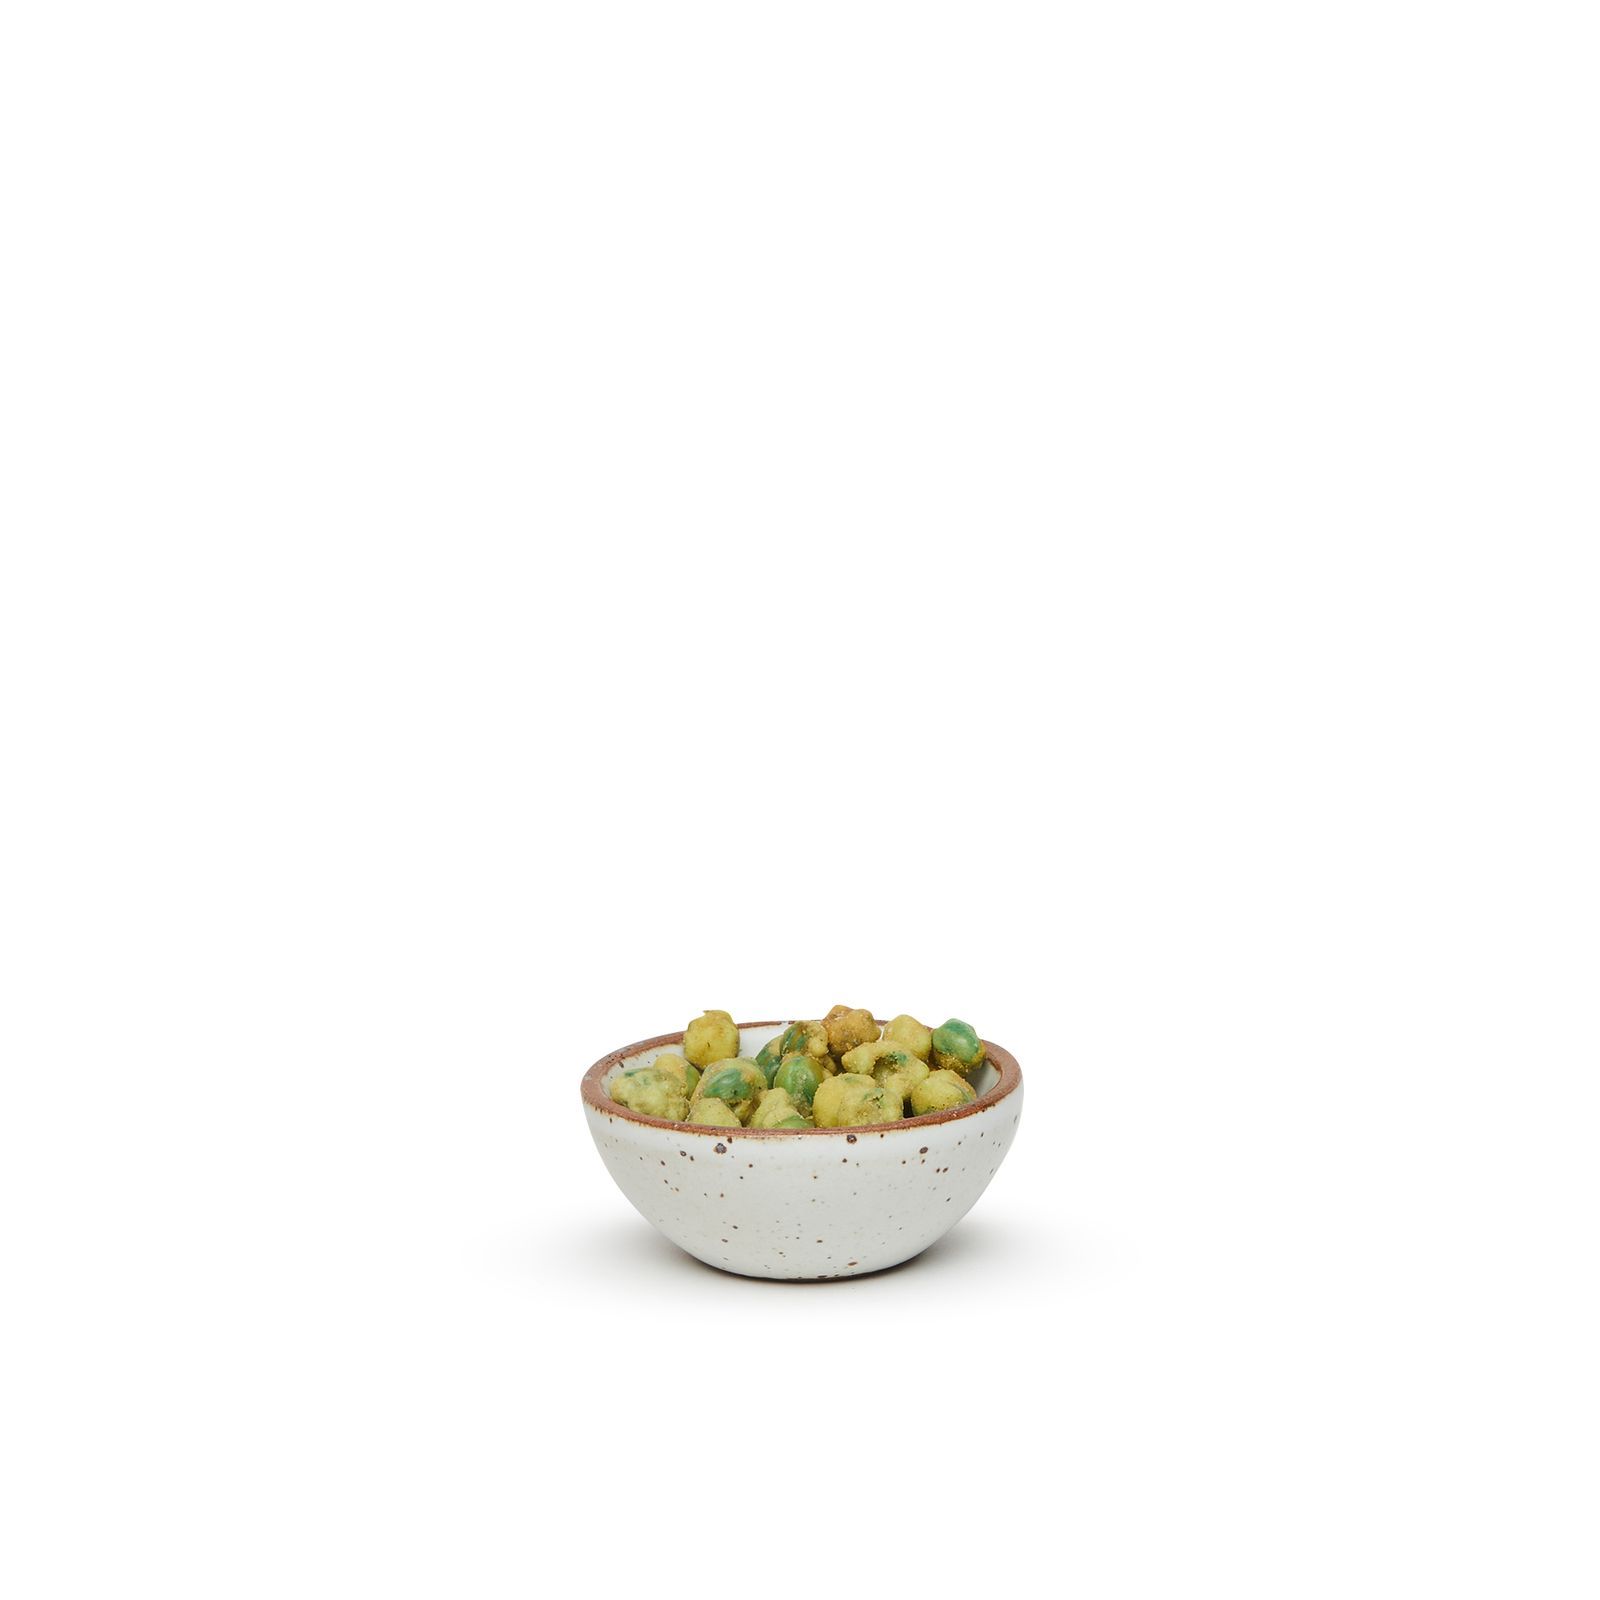 A small serving of wasabi nuts in a mini bowl that coupe fit in the palm of your hand. It really is cute.